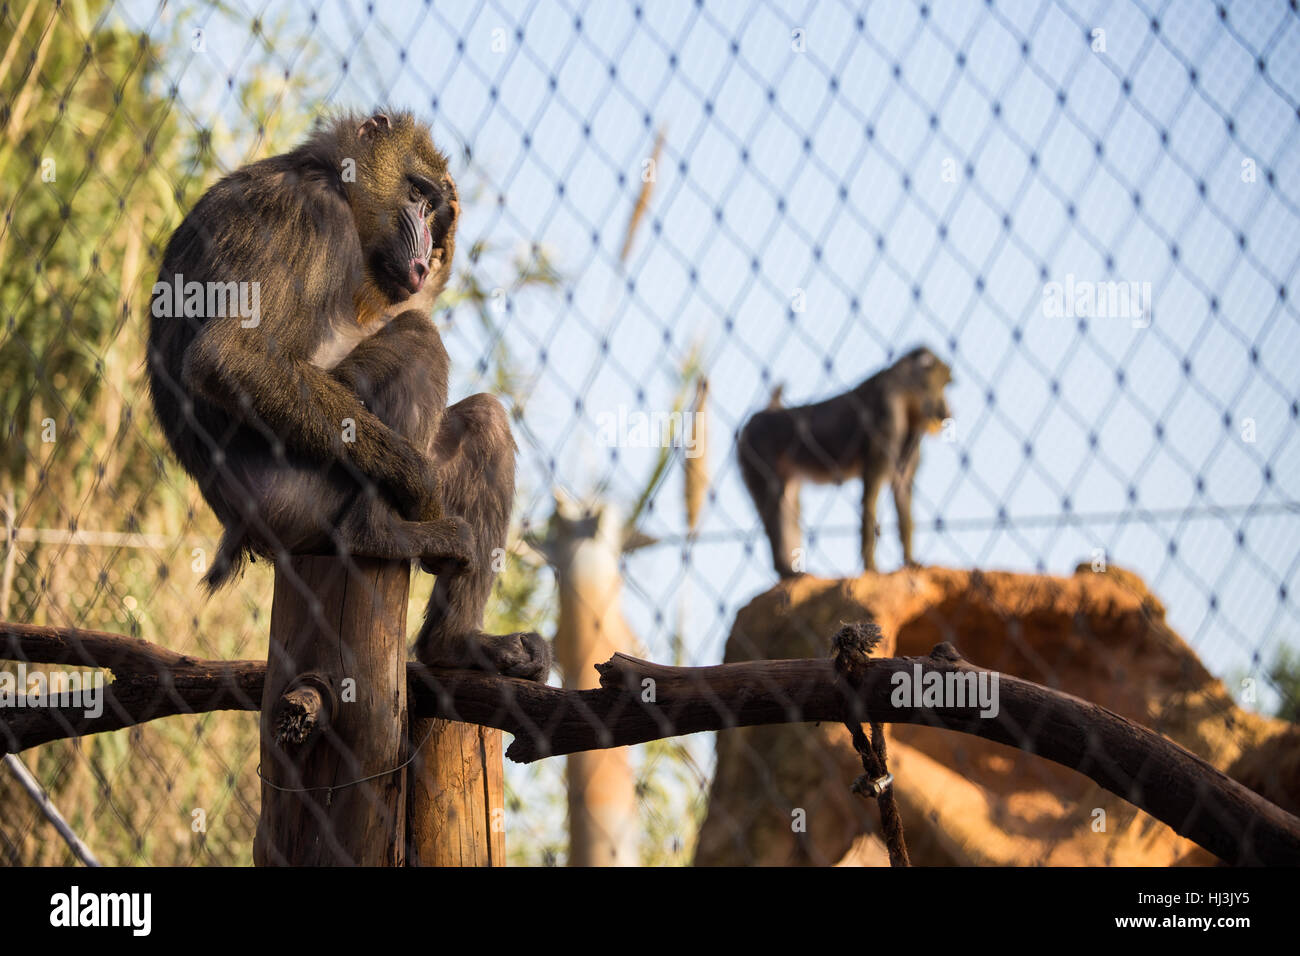 Female Mandrills sitting in a cage rubbing her head, in Zoo of Rabat, Morocco Stock Photo